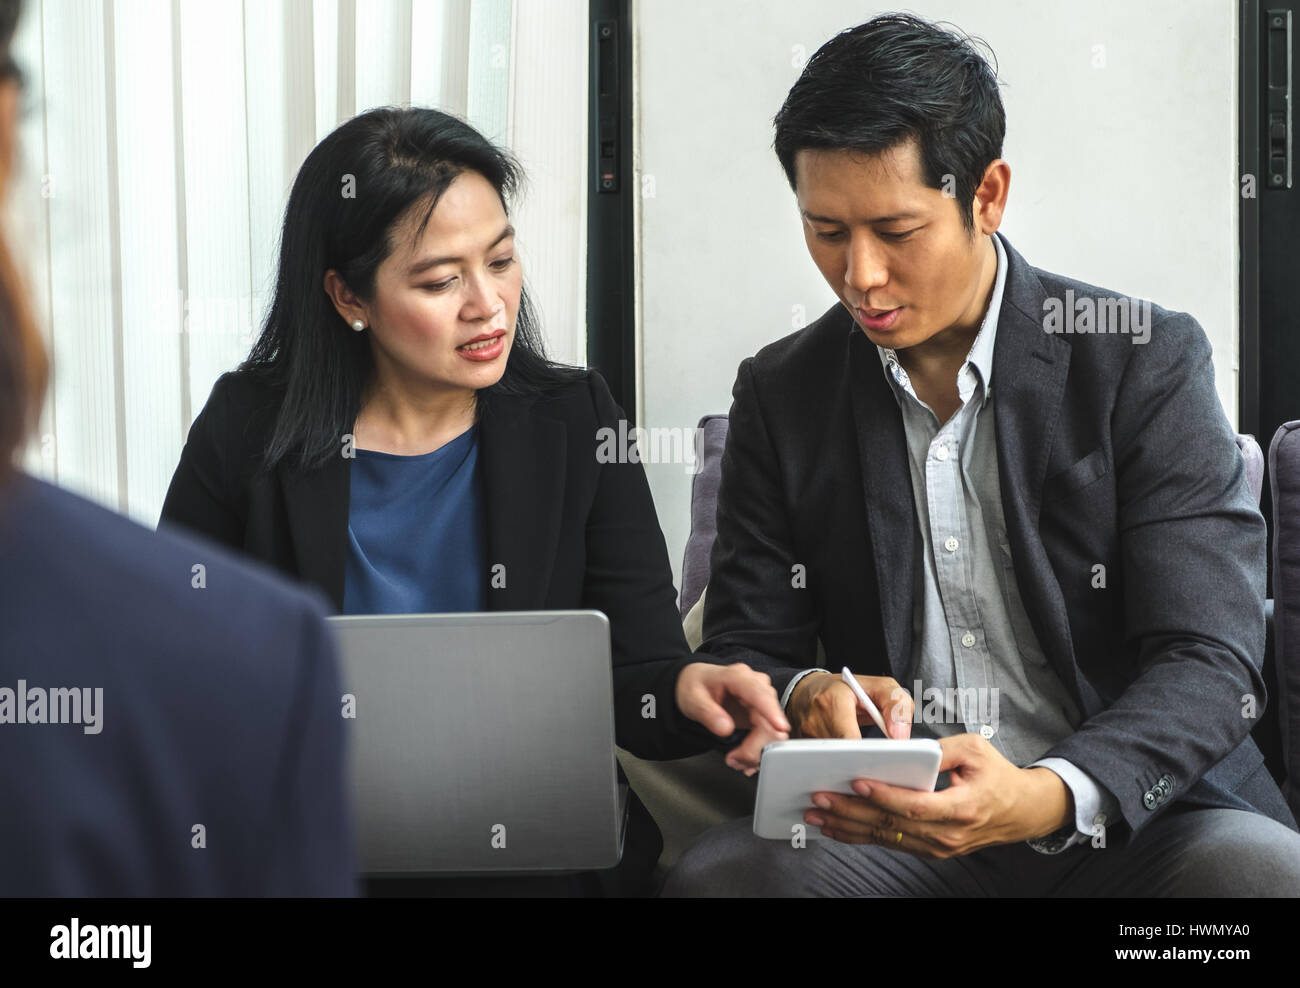 Business woman and man using tablet,notebook to planing work at corporate meeting in office,Business conference concept. Stock Photo